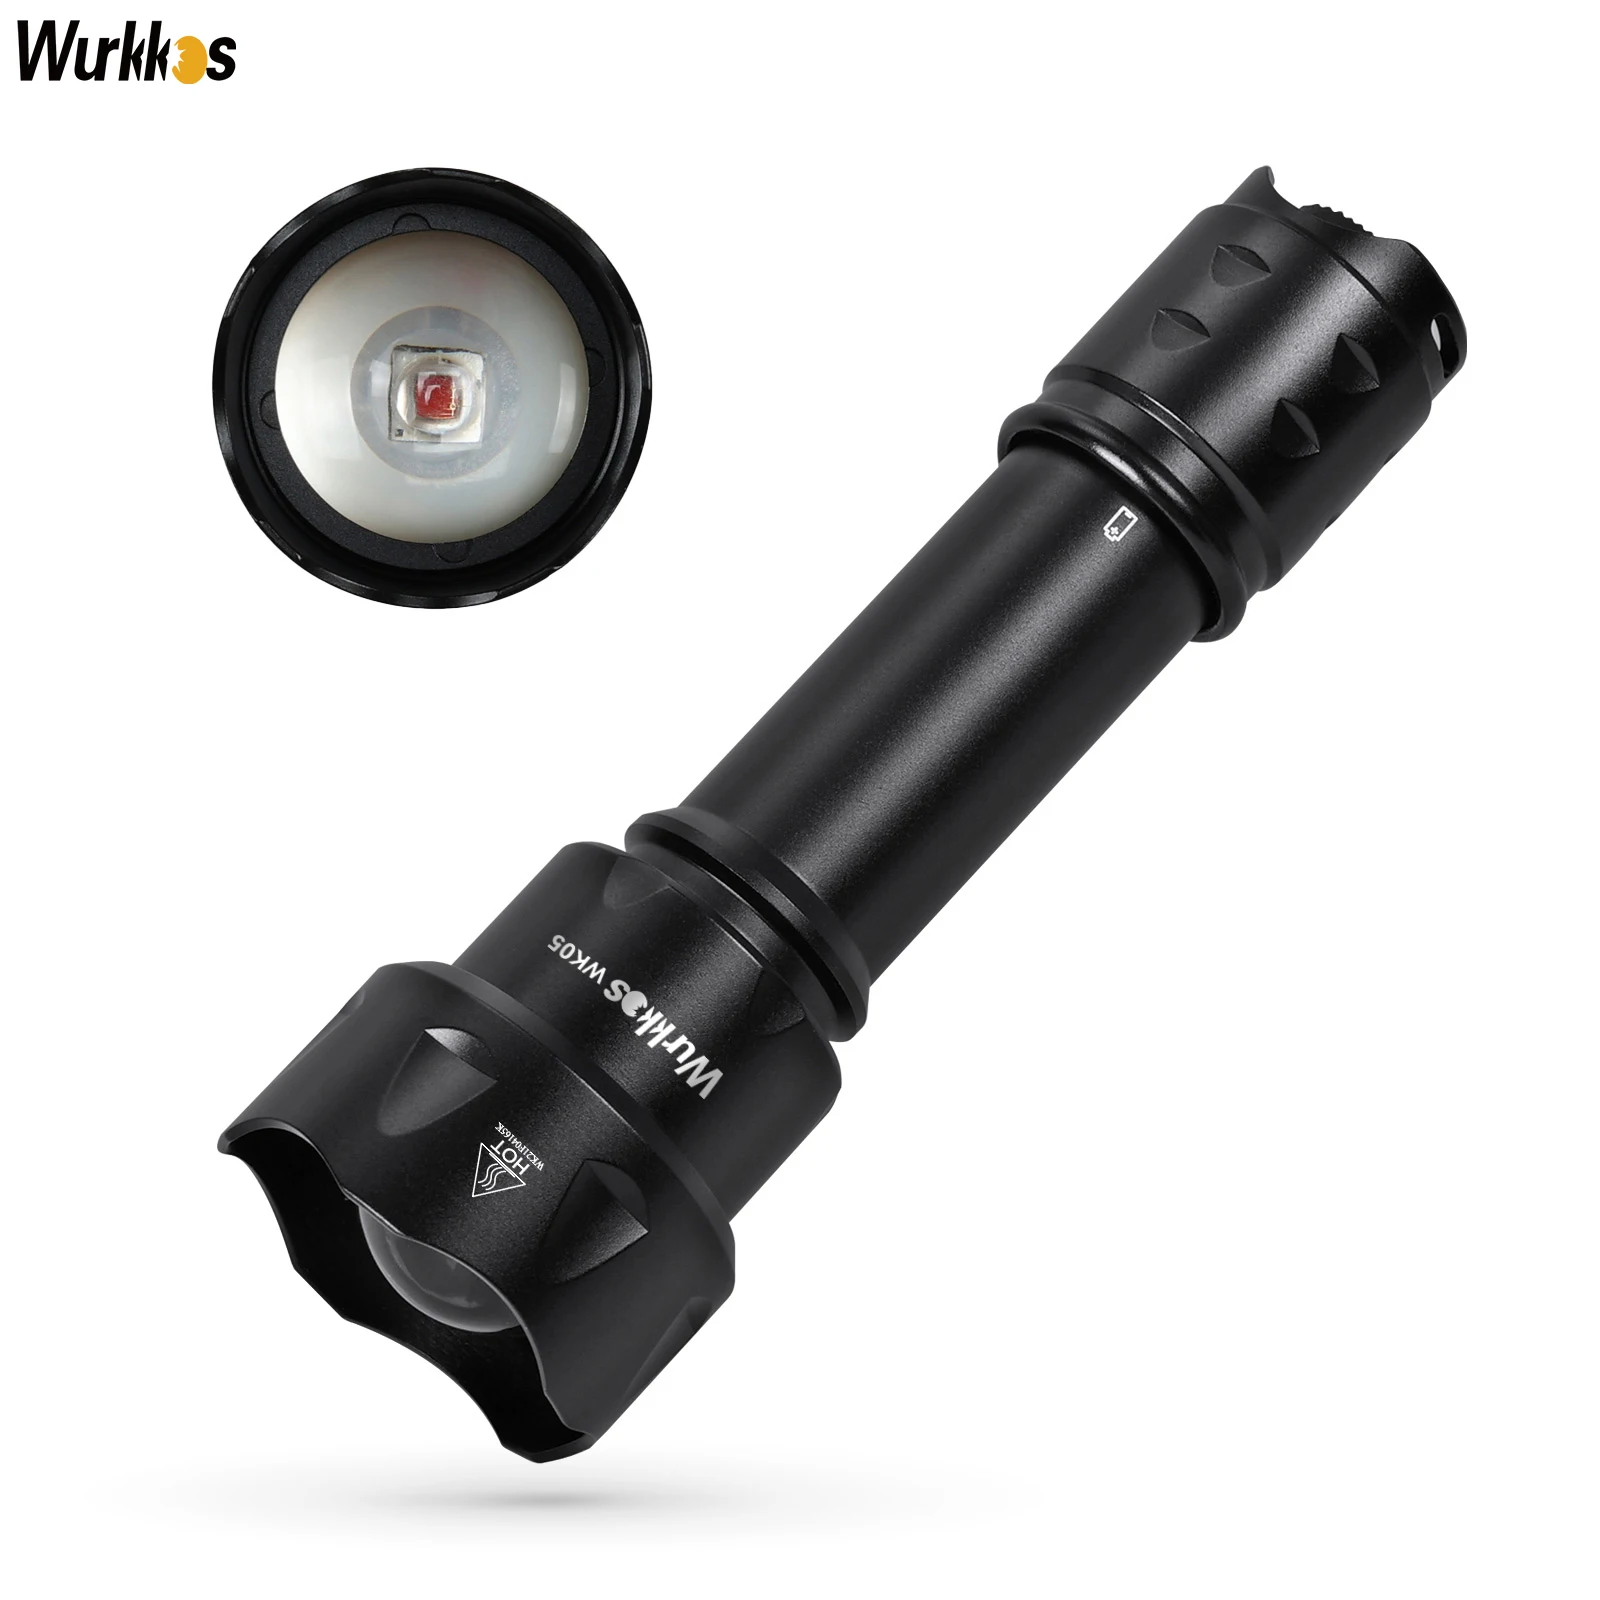 Wurkkos WK05 Powerful 1000lm Tactical LED Flashlight Zoomable 18650 Lamp CREE XML T6 LED Tail Switch Rechargeable Battery Torch